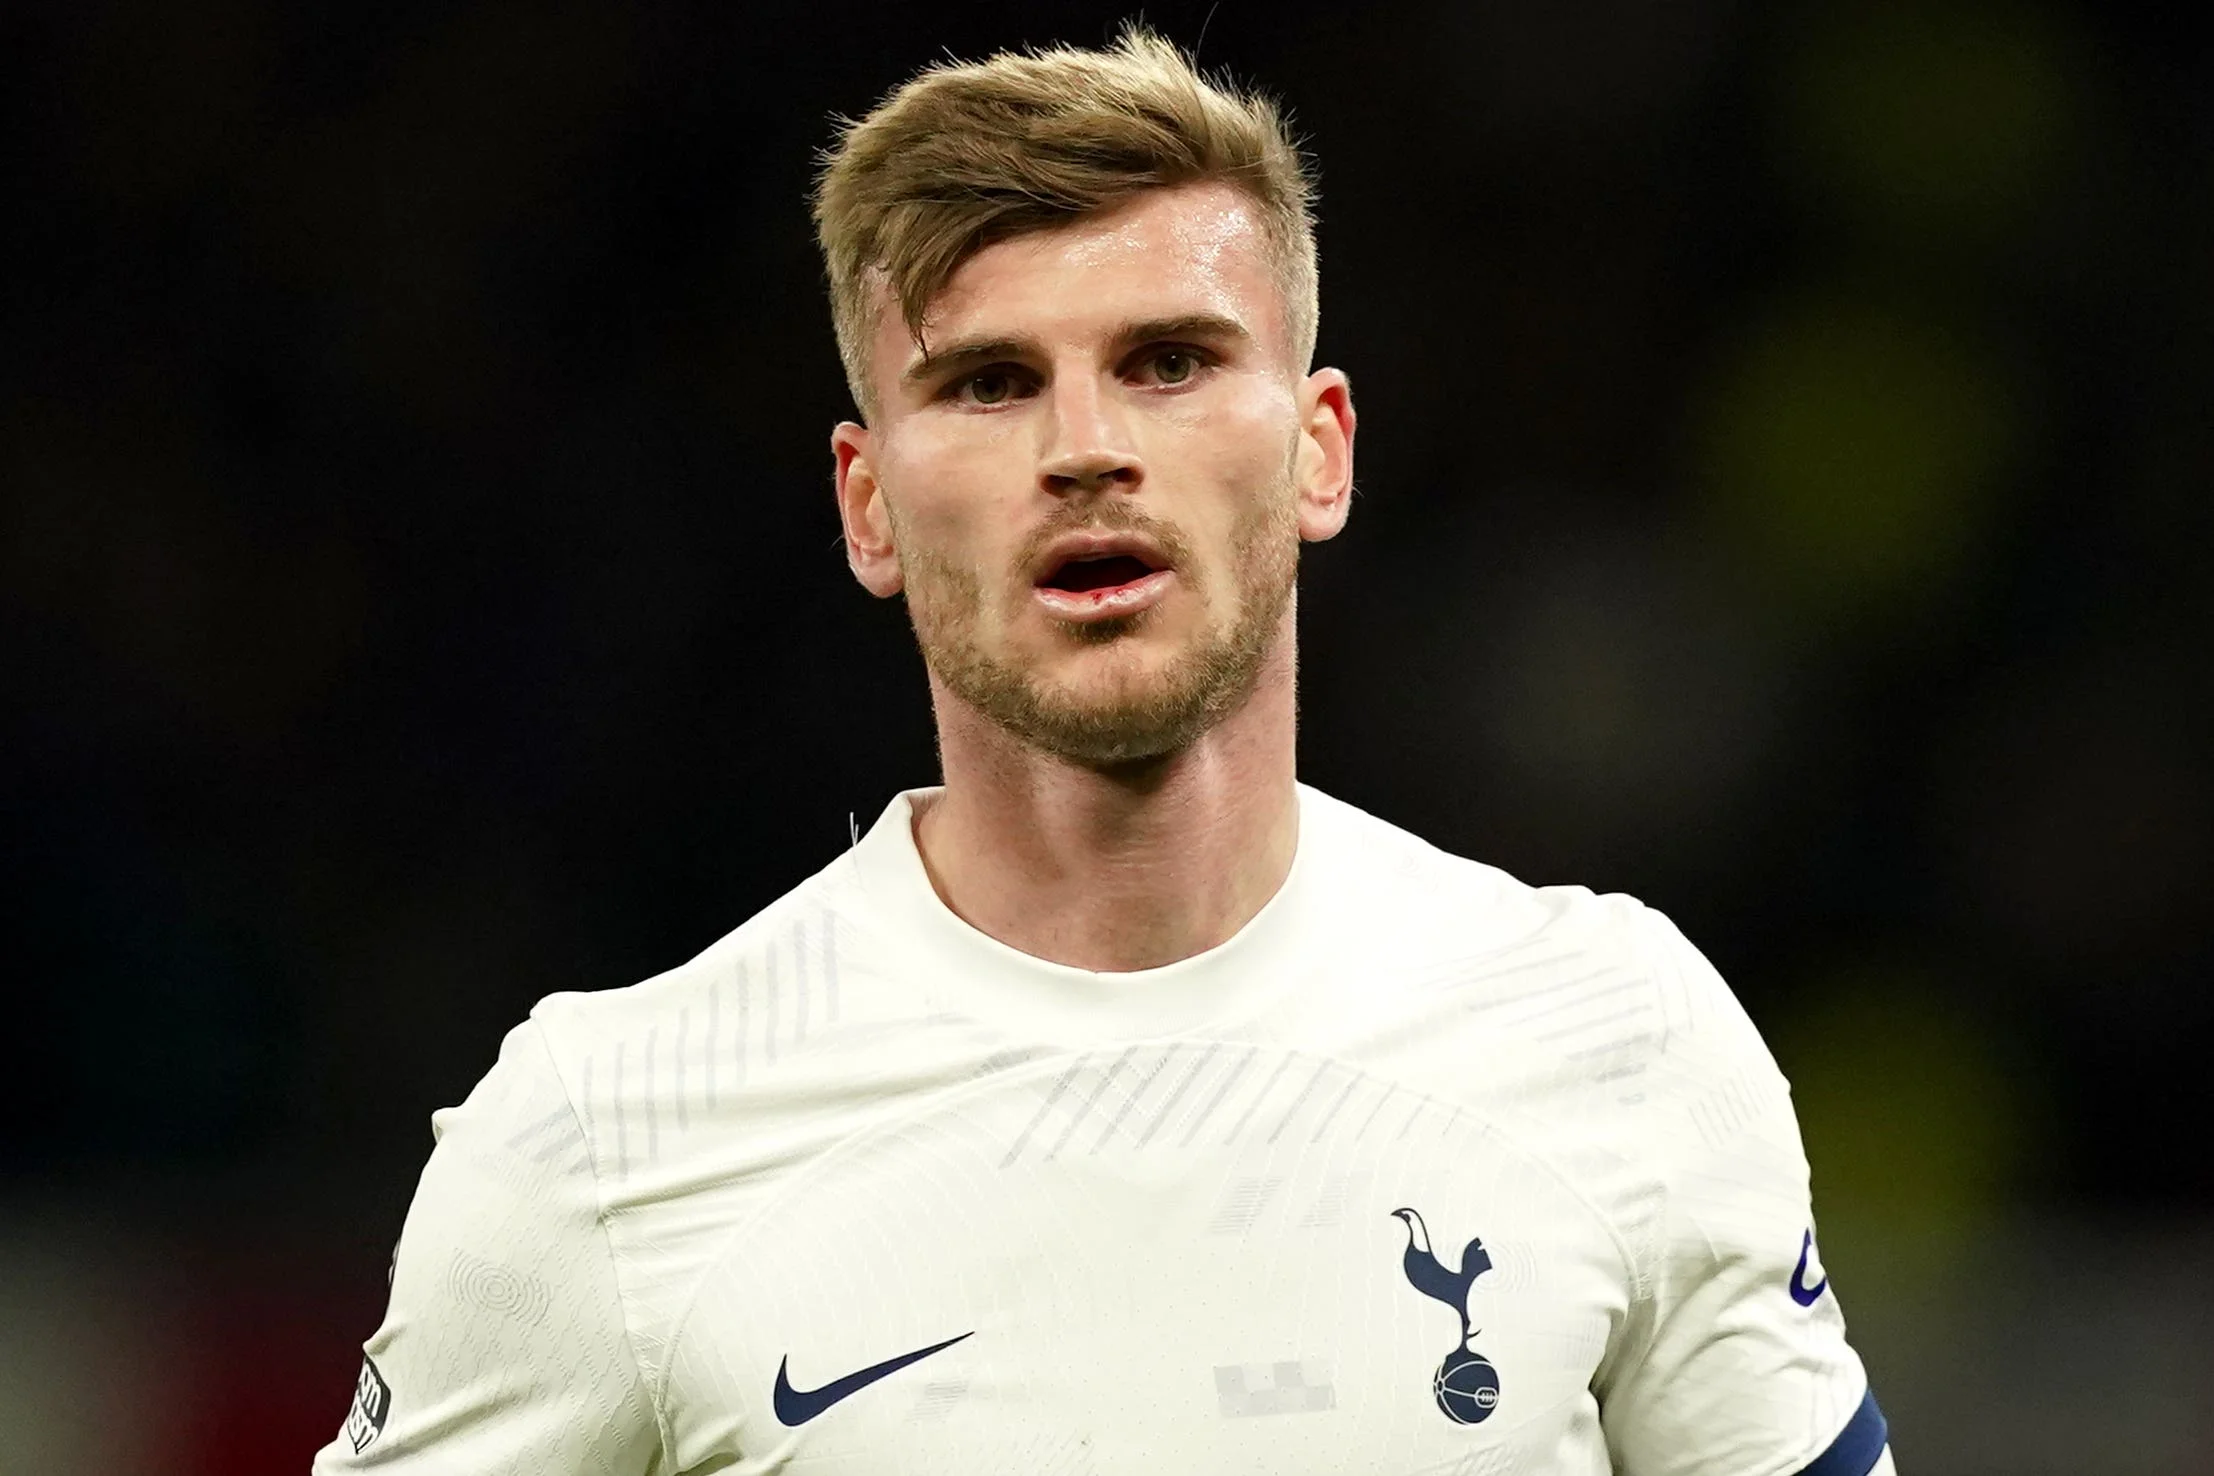 Timo Werner finds himself on the receiving end of heat